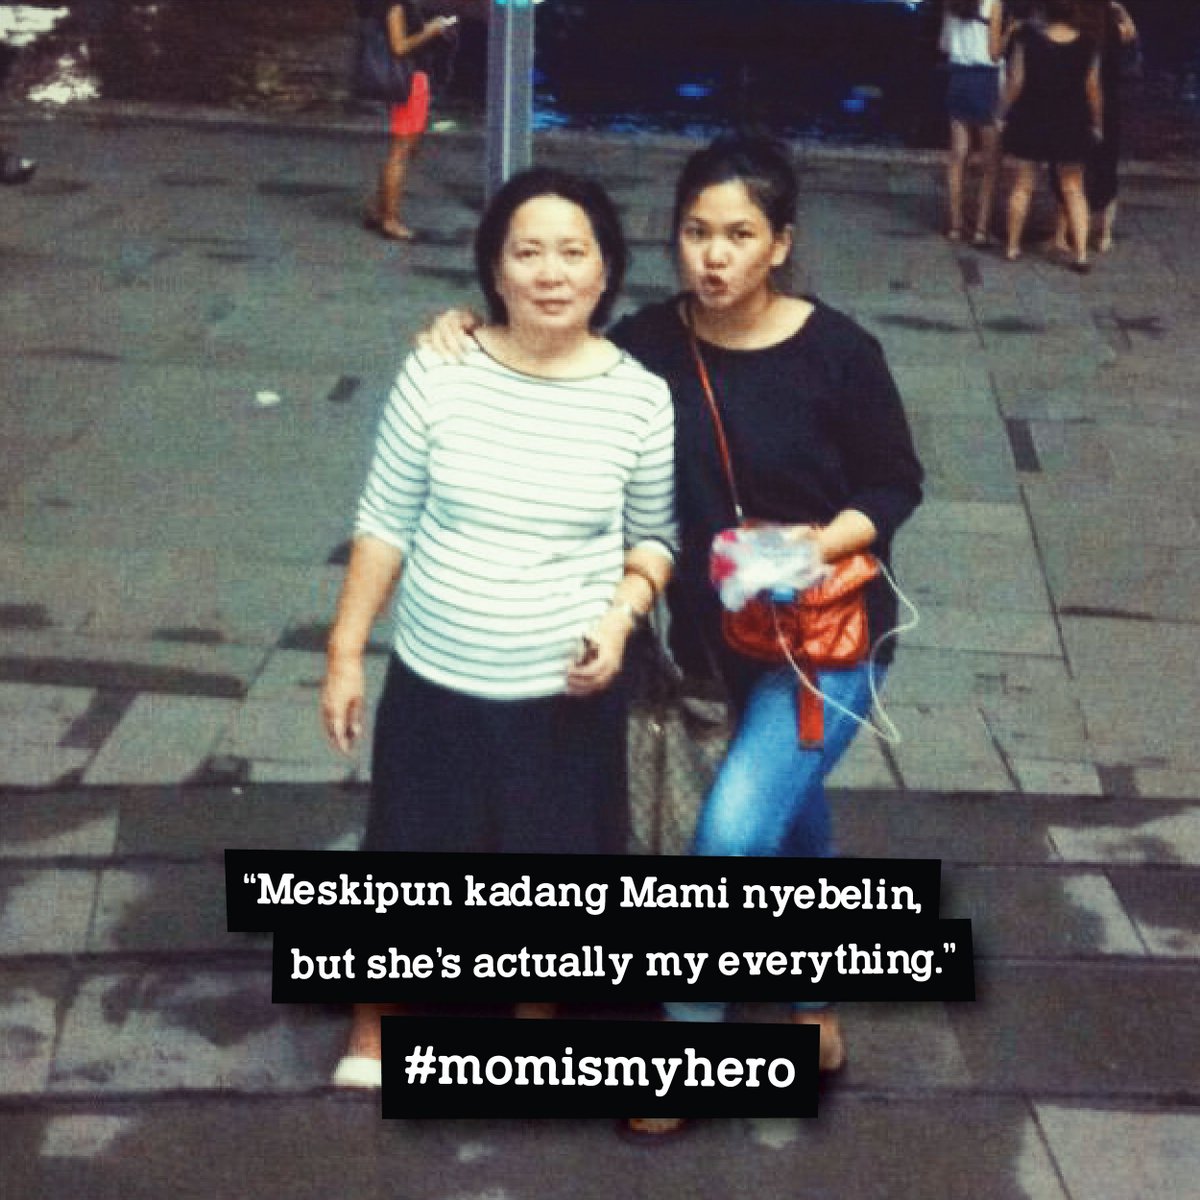 Happy Mother’s Day! Share your #momismyhero moment to celebrate today!